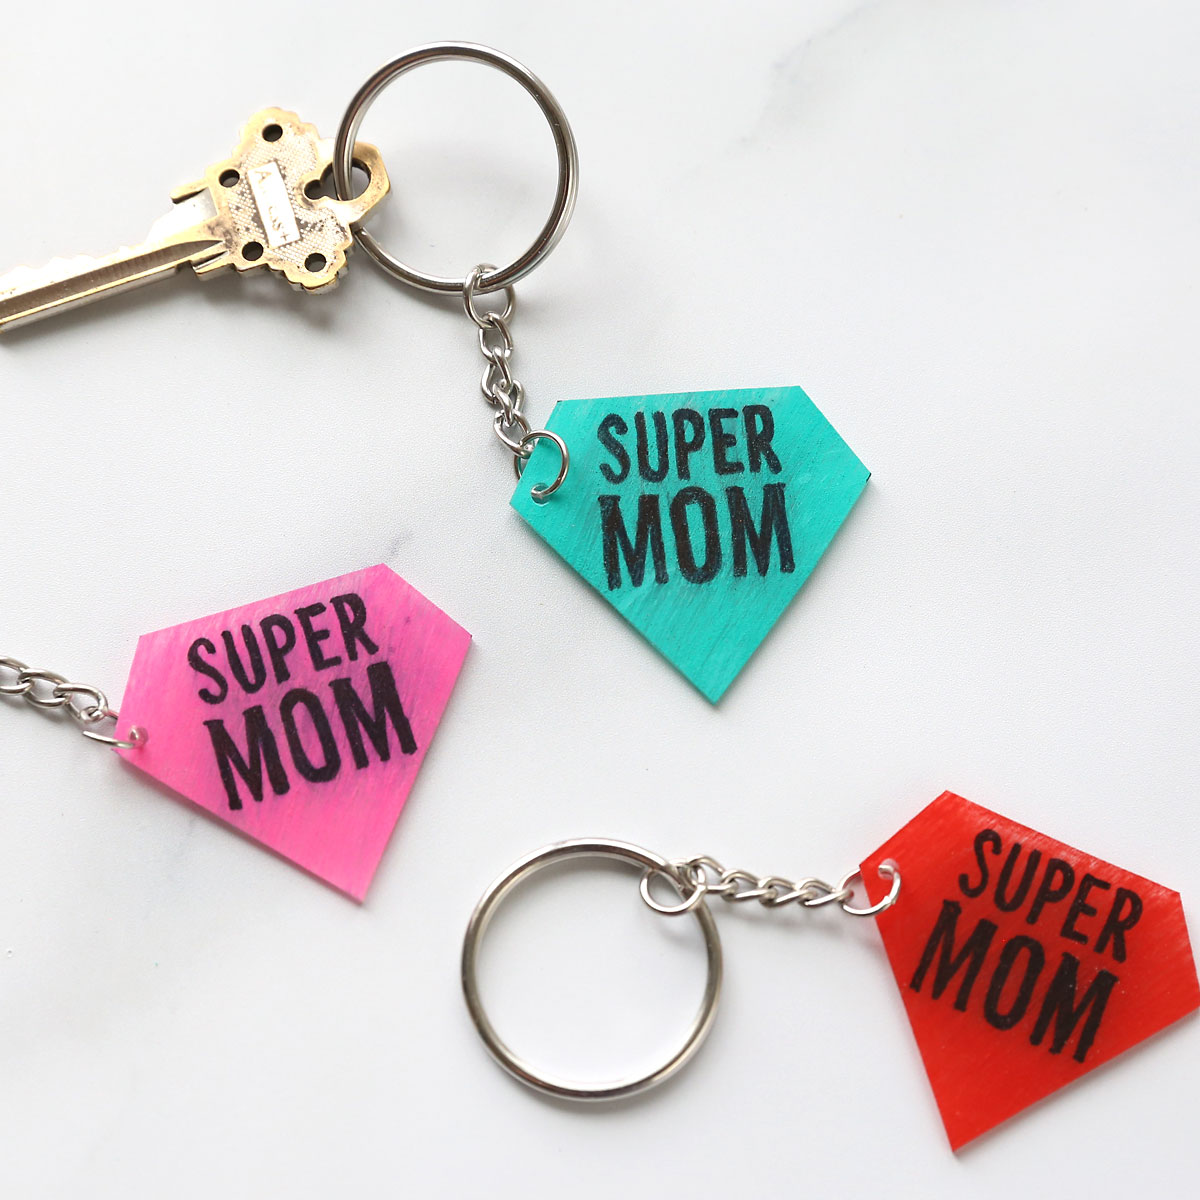 Shrinky Dink Keychains for {Super} Mom - It's Always Autumn